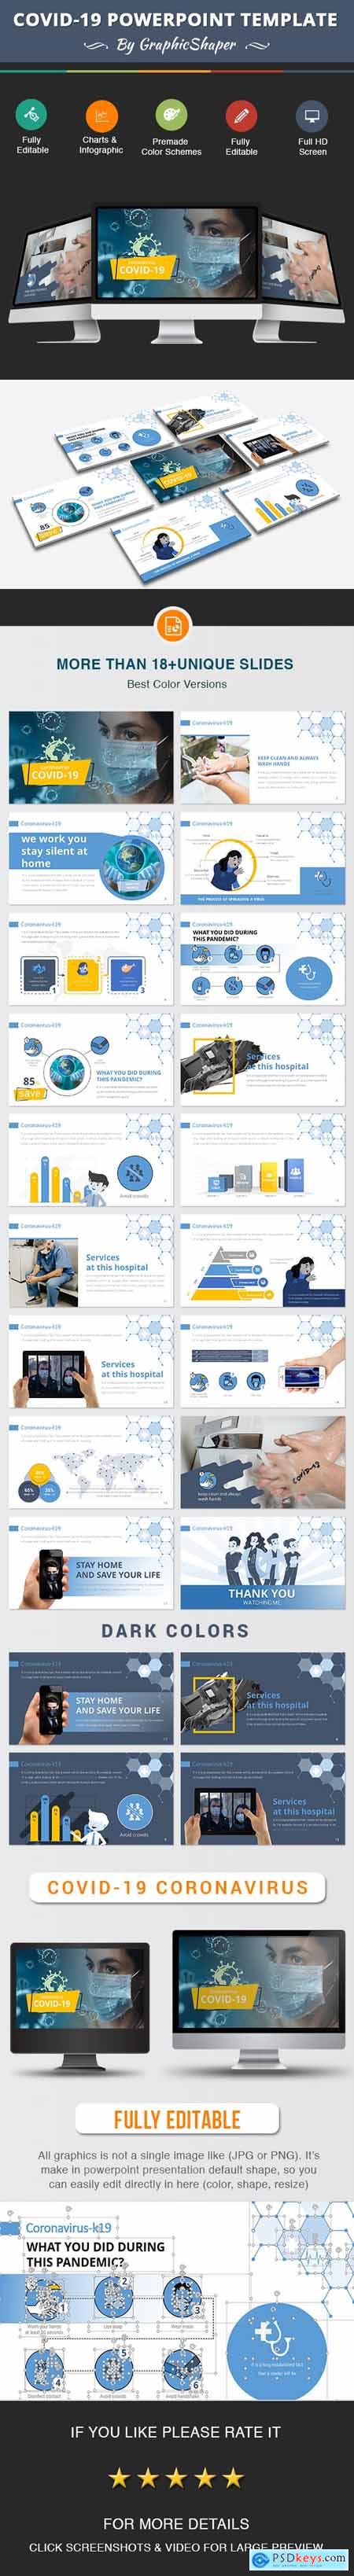 Covid-19 Powerpoint Template 26622759